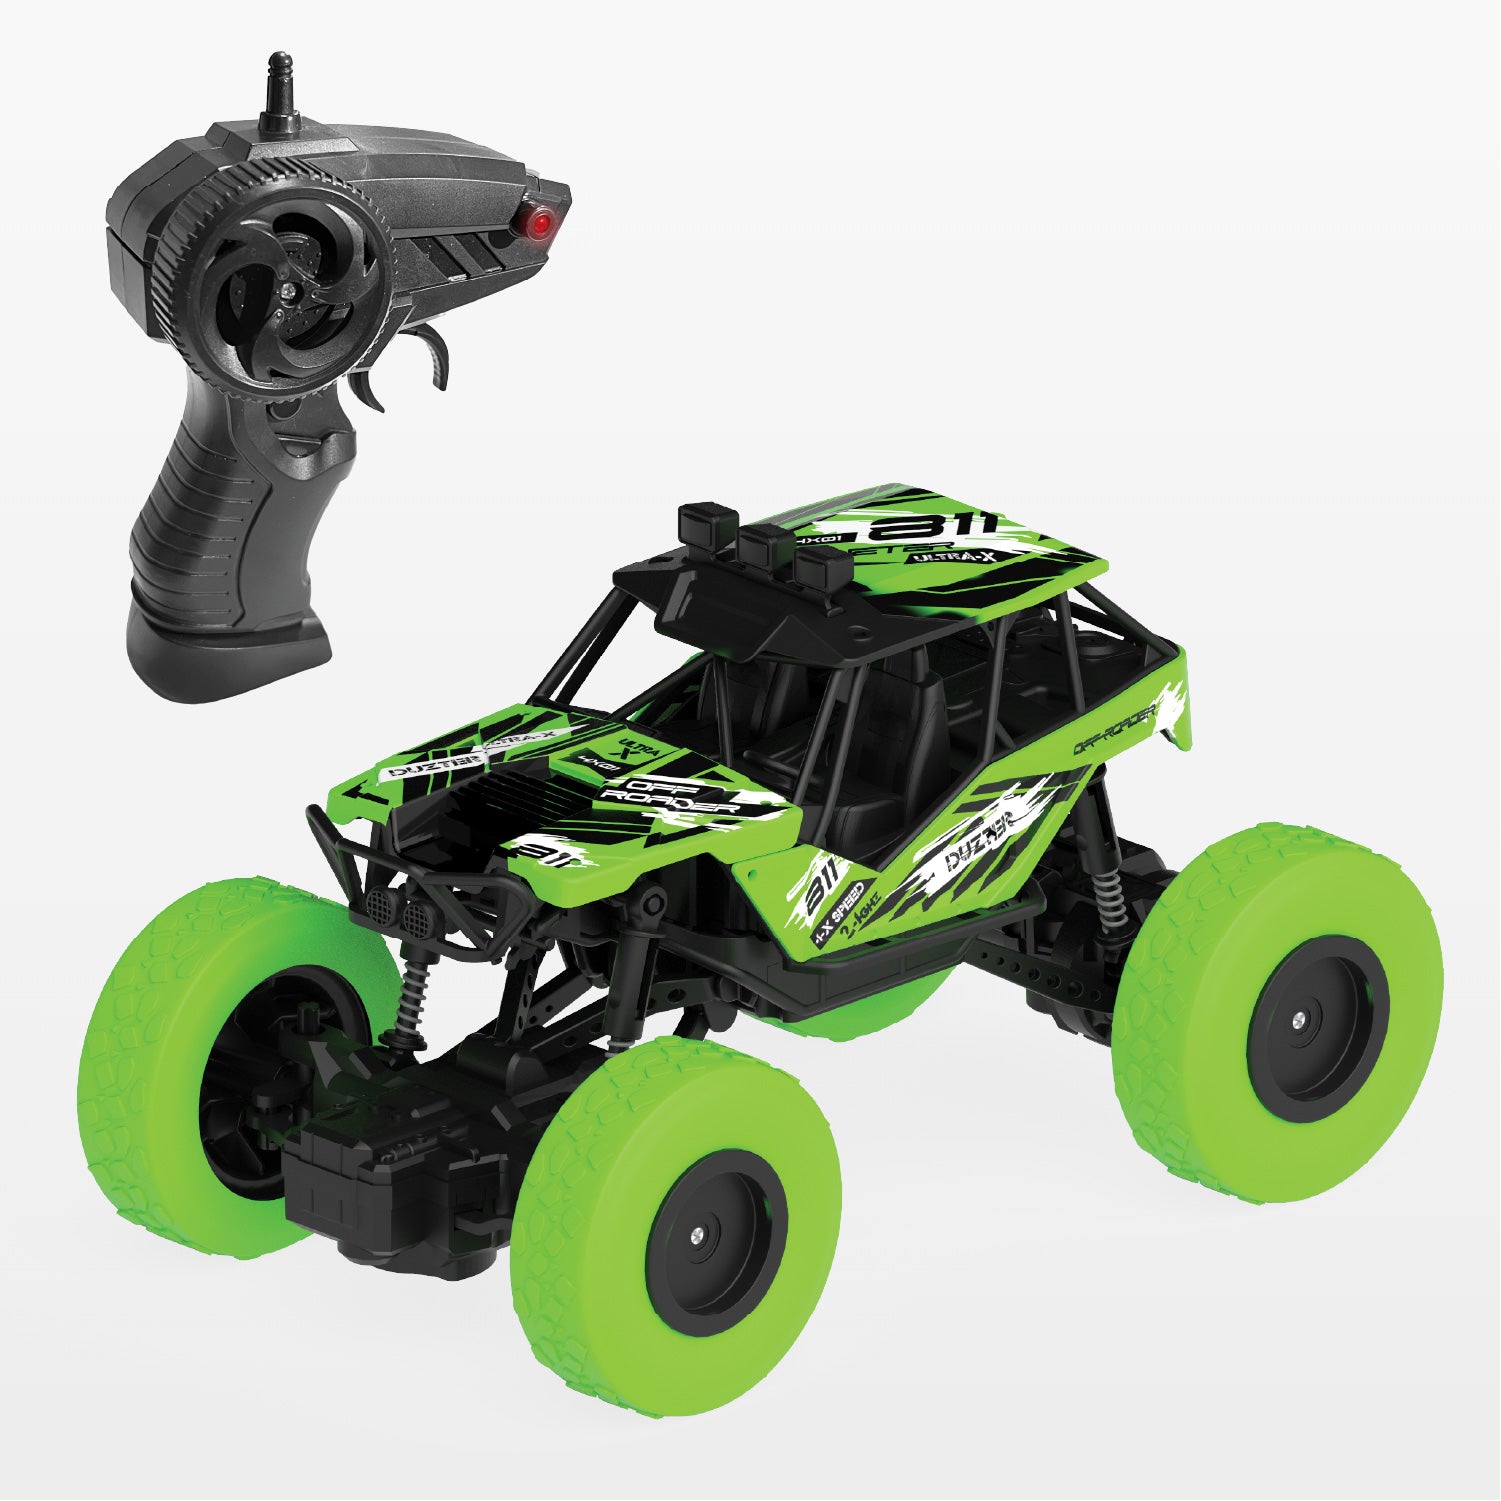 DUZTER- Rechargeable Remote Controlled Racing Rc Car| High-Speed Remote Control Car Toy | Gift For Boys And Girls